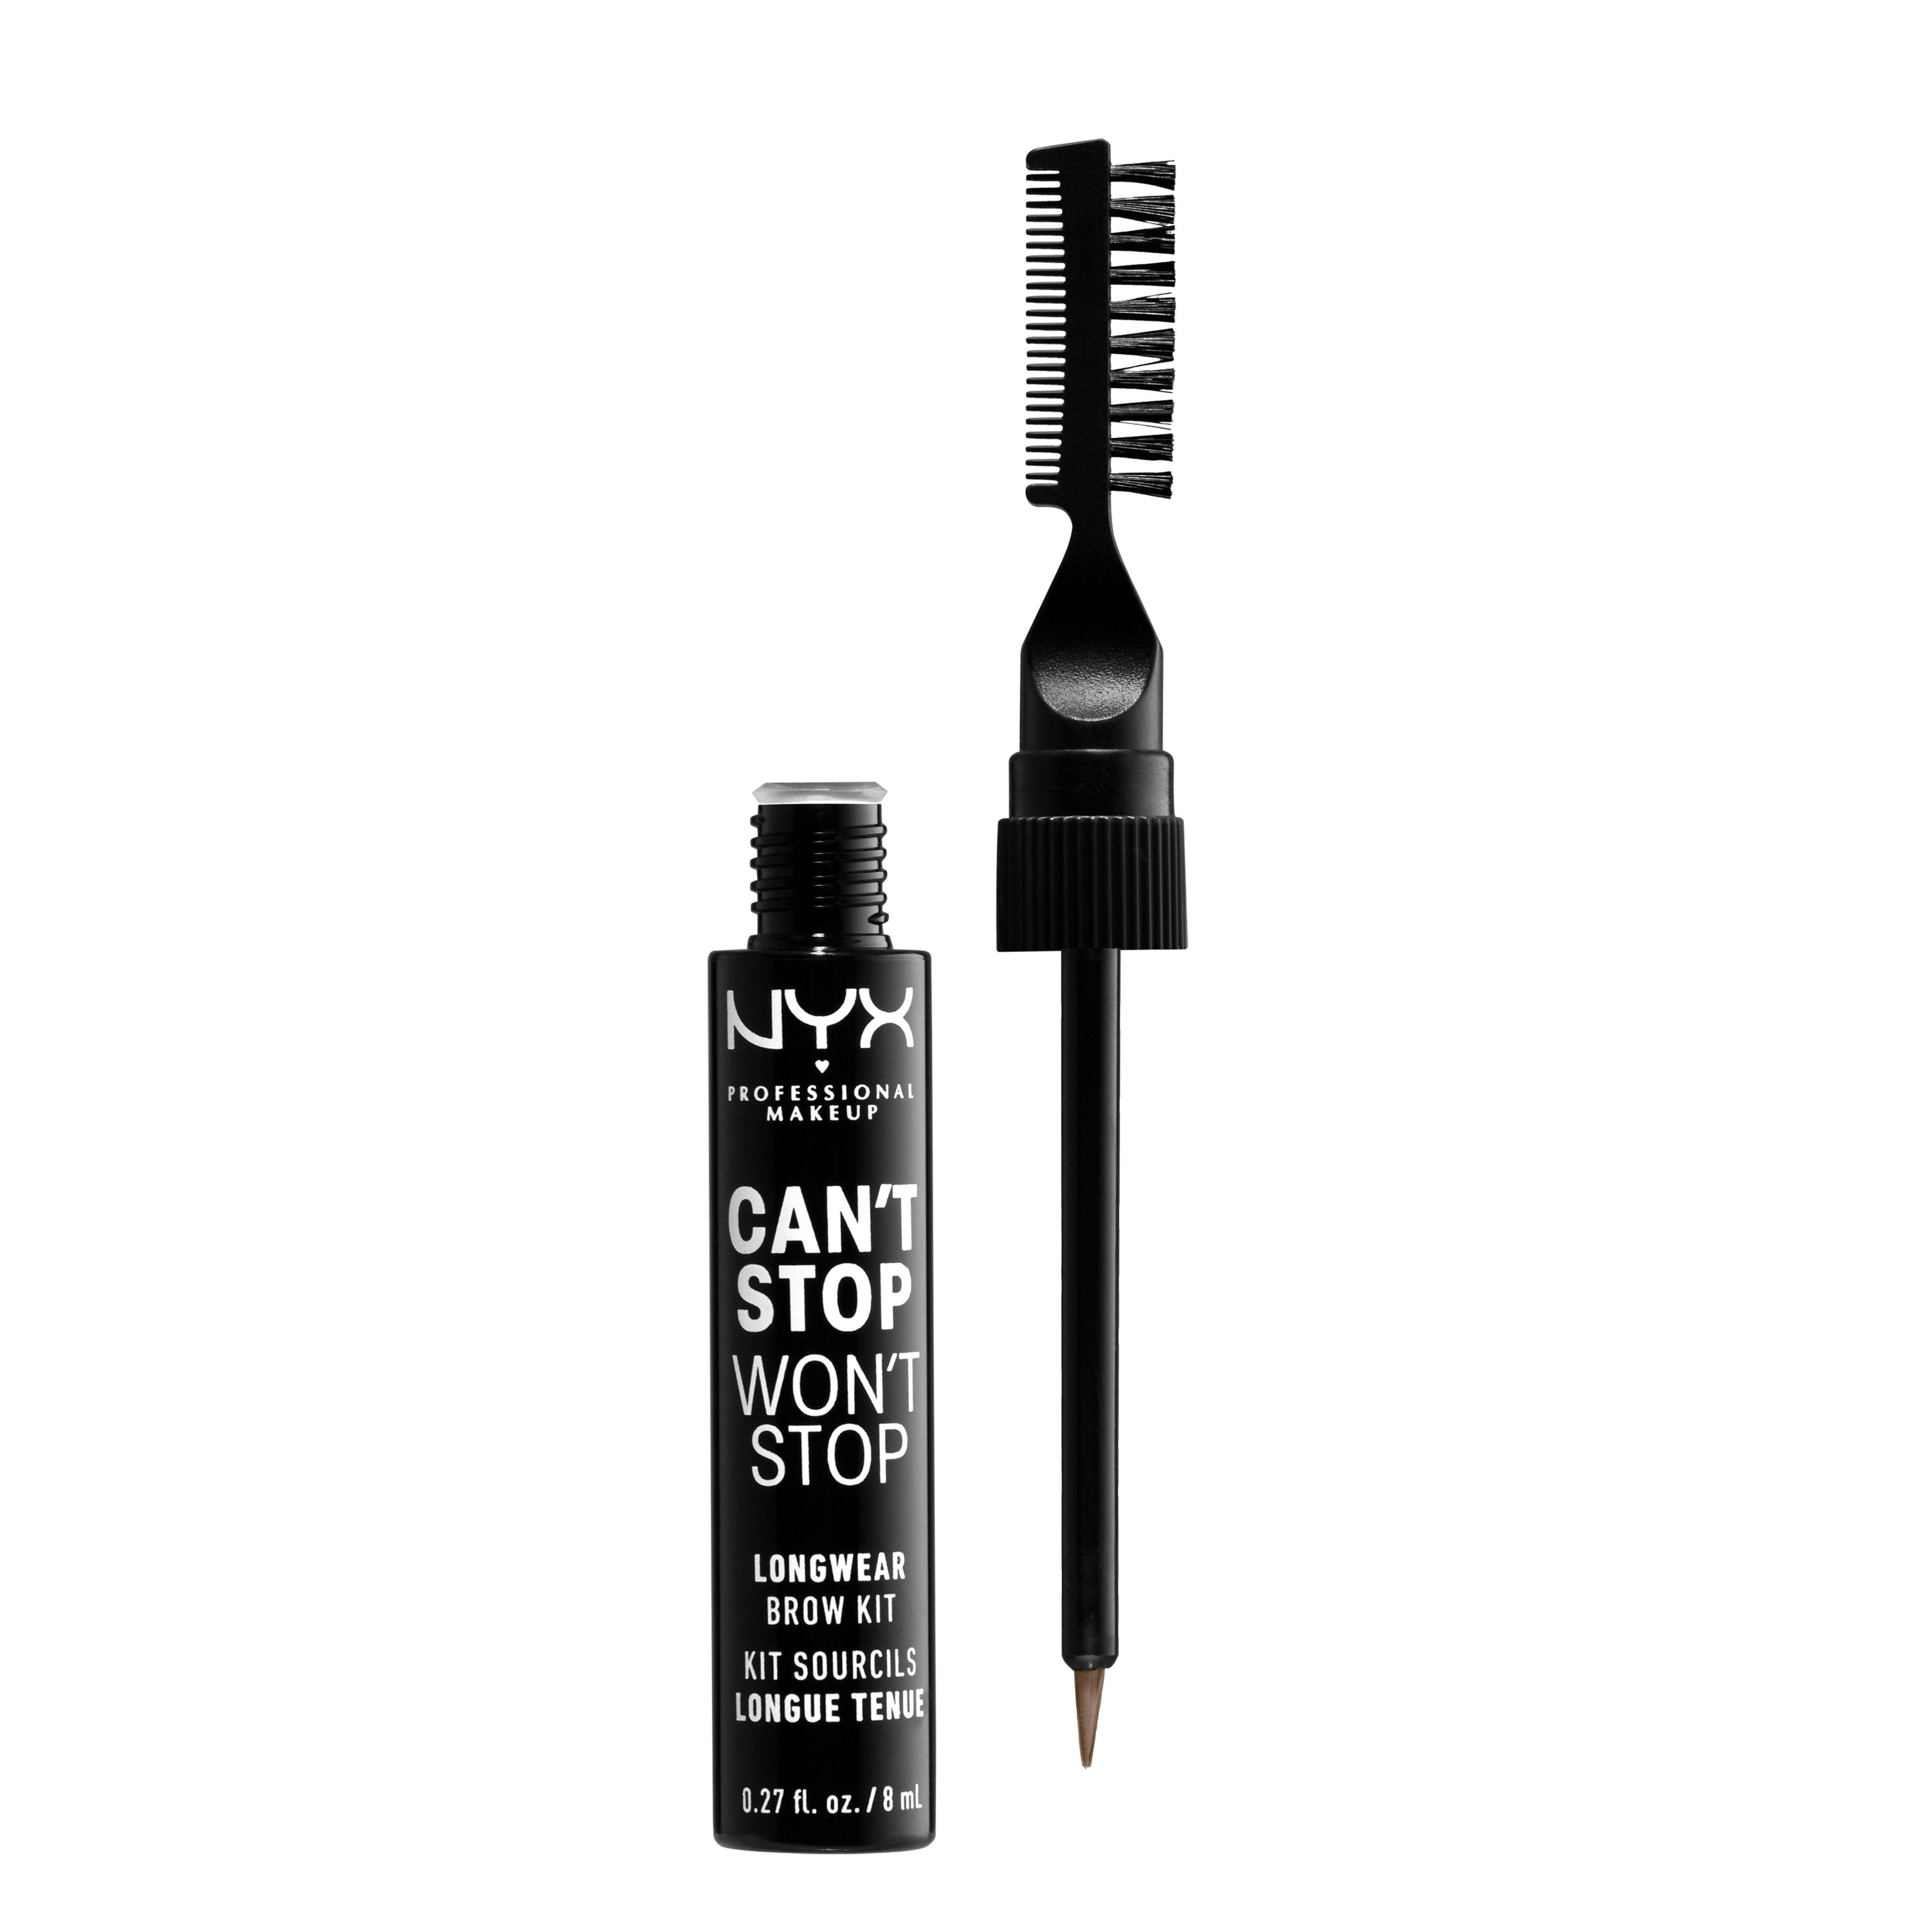 Image of NYX-PROFESSIONAL-MAKEUP Cant Stop Wont Stop Longwear Brow Ink Kit - 26g